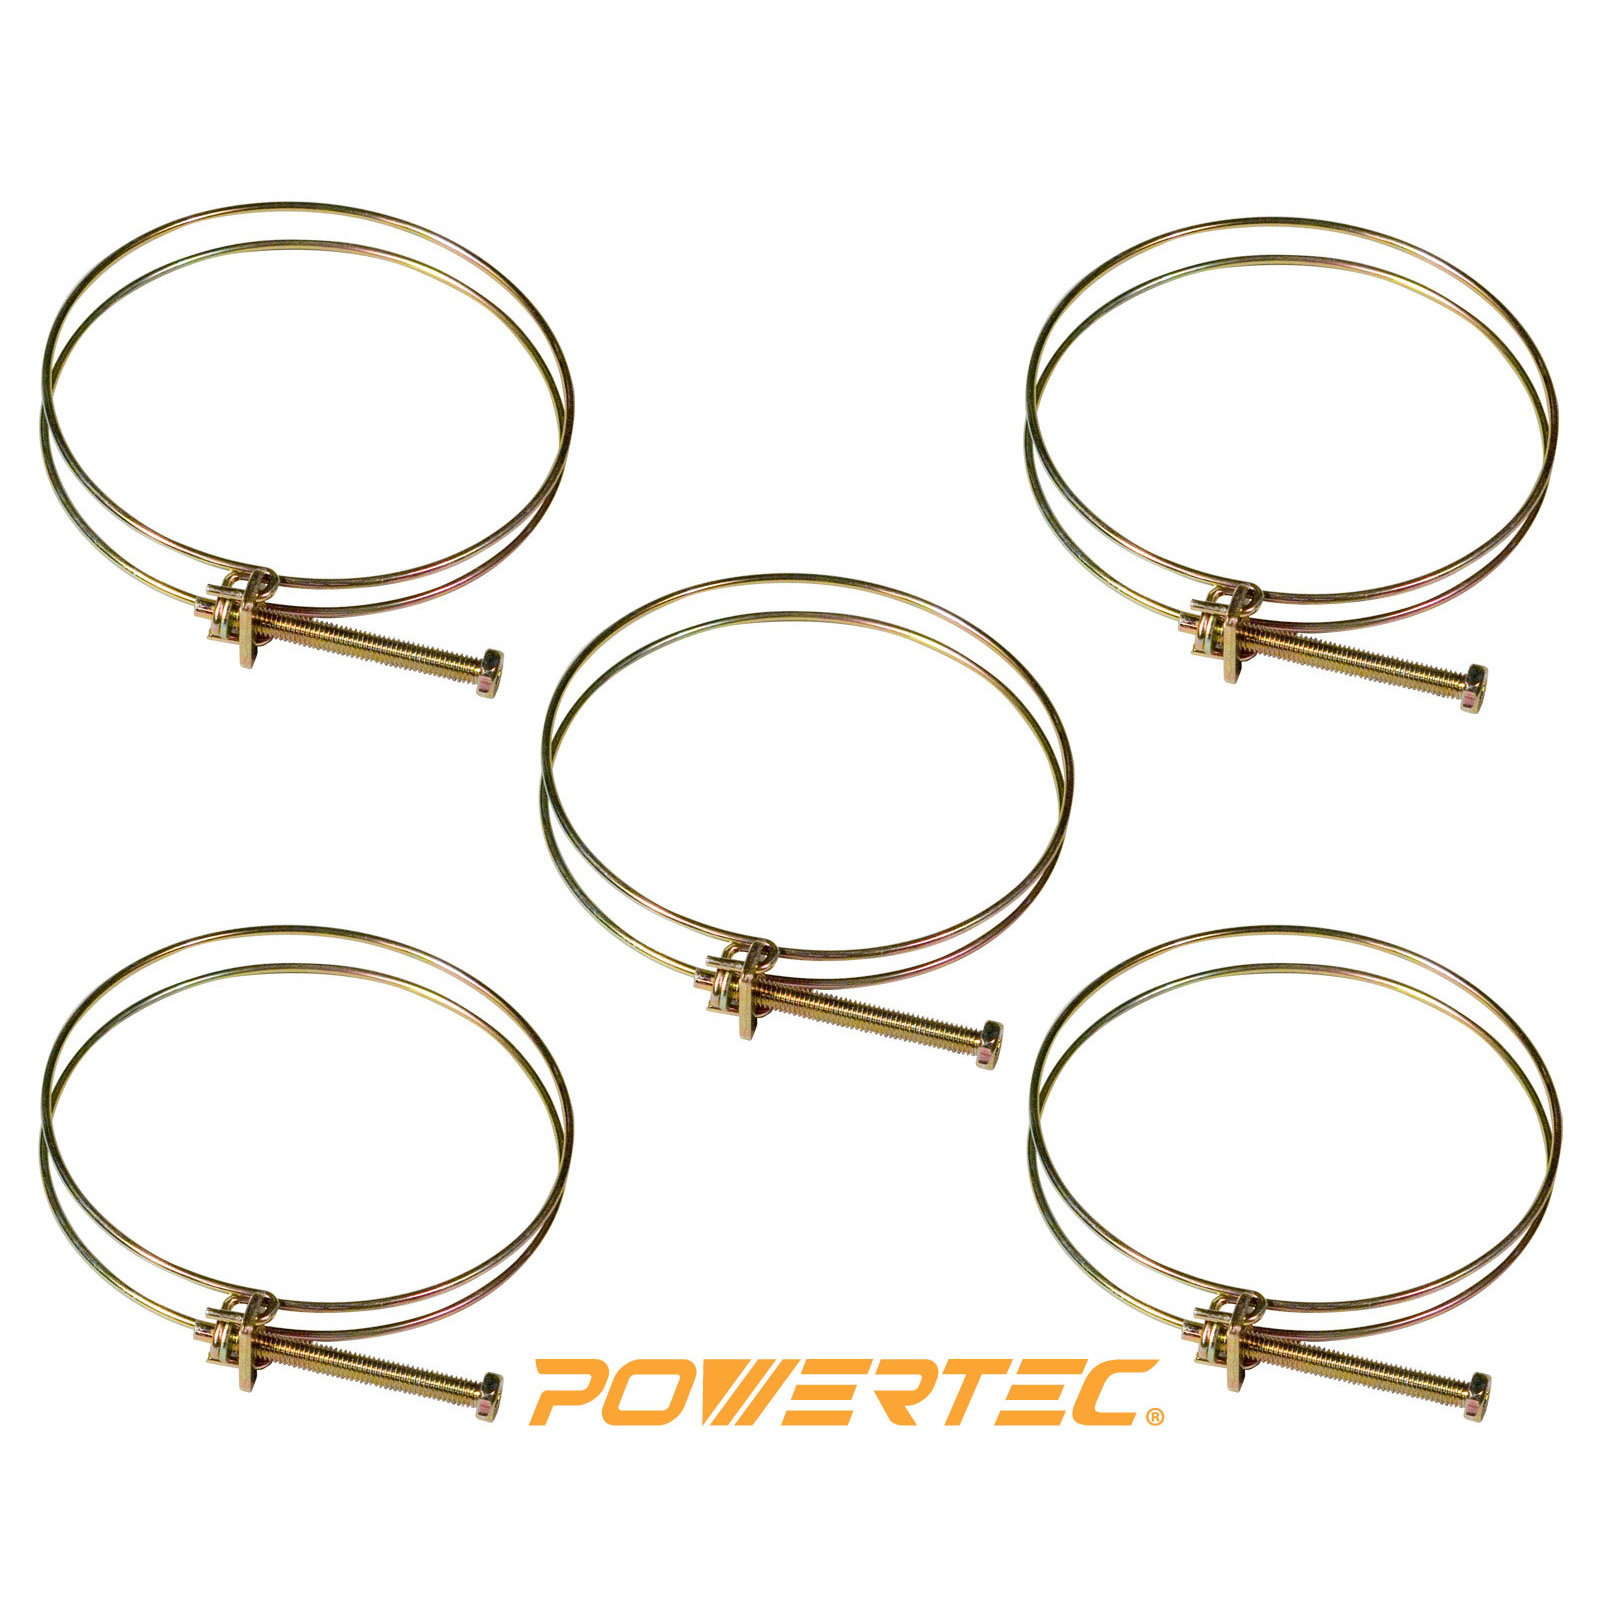 Powertec 70101 4-Inch Wire Hose Clamp, 5-Pack